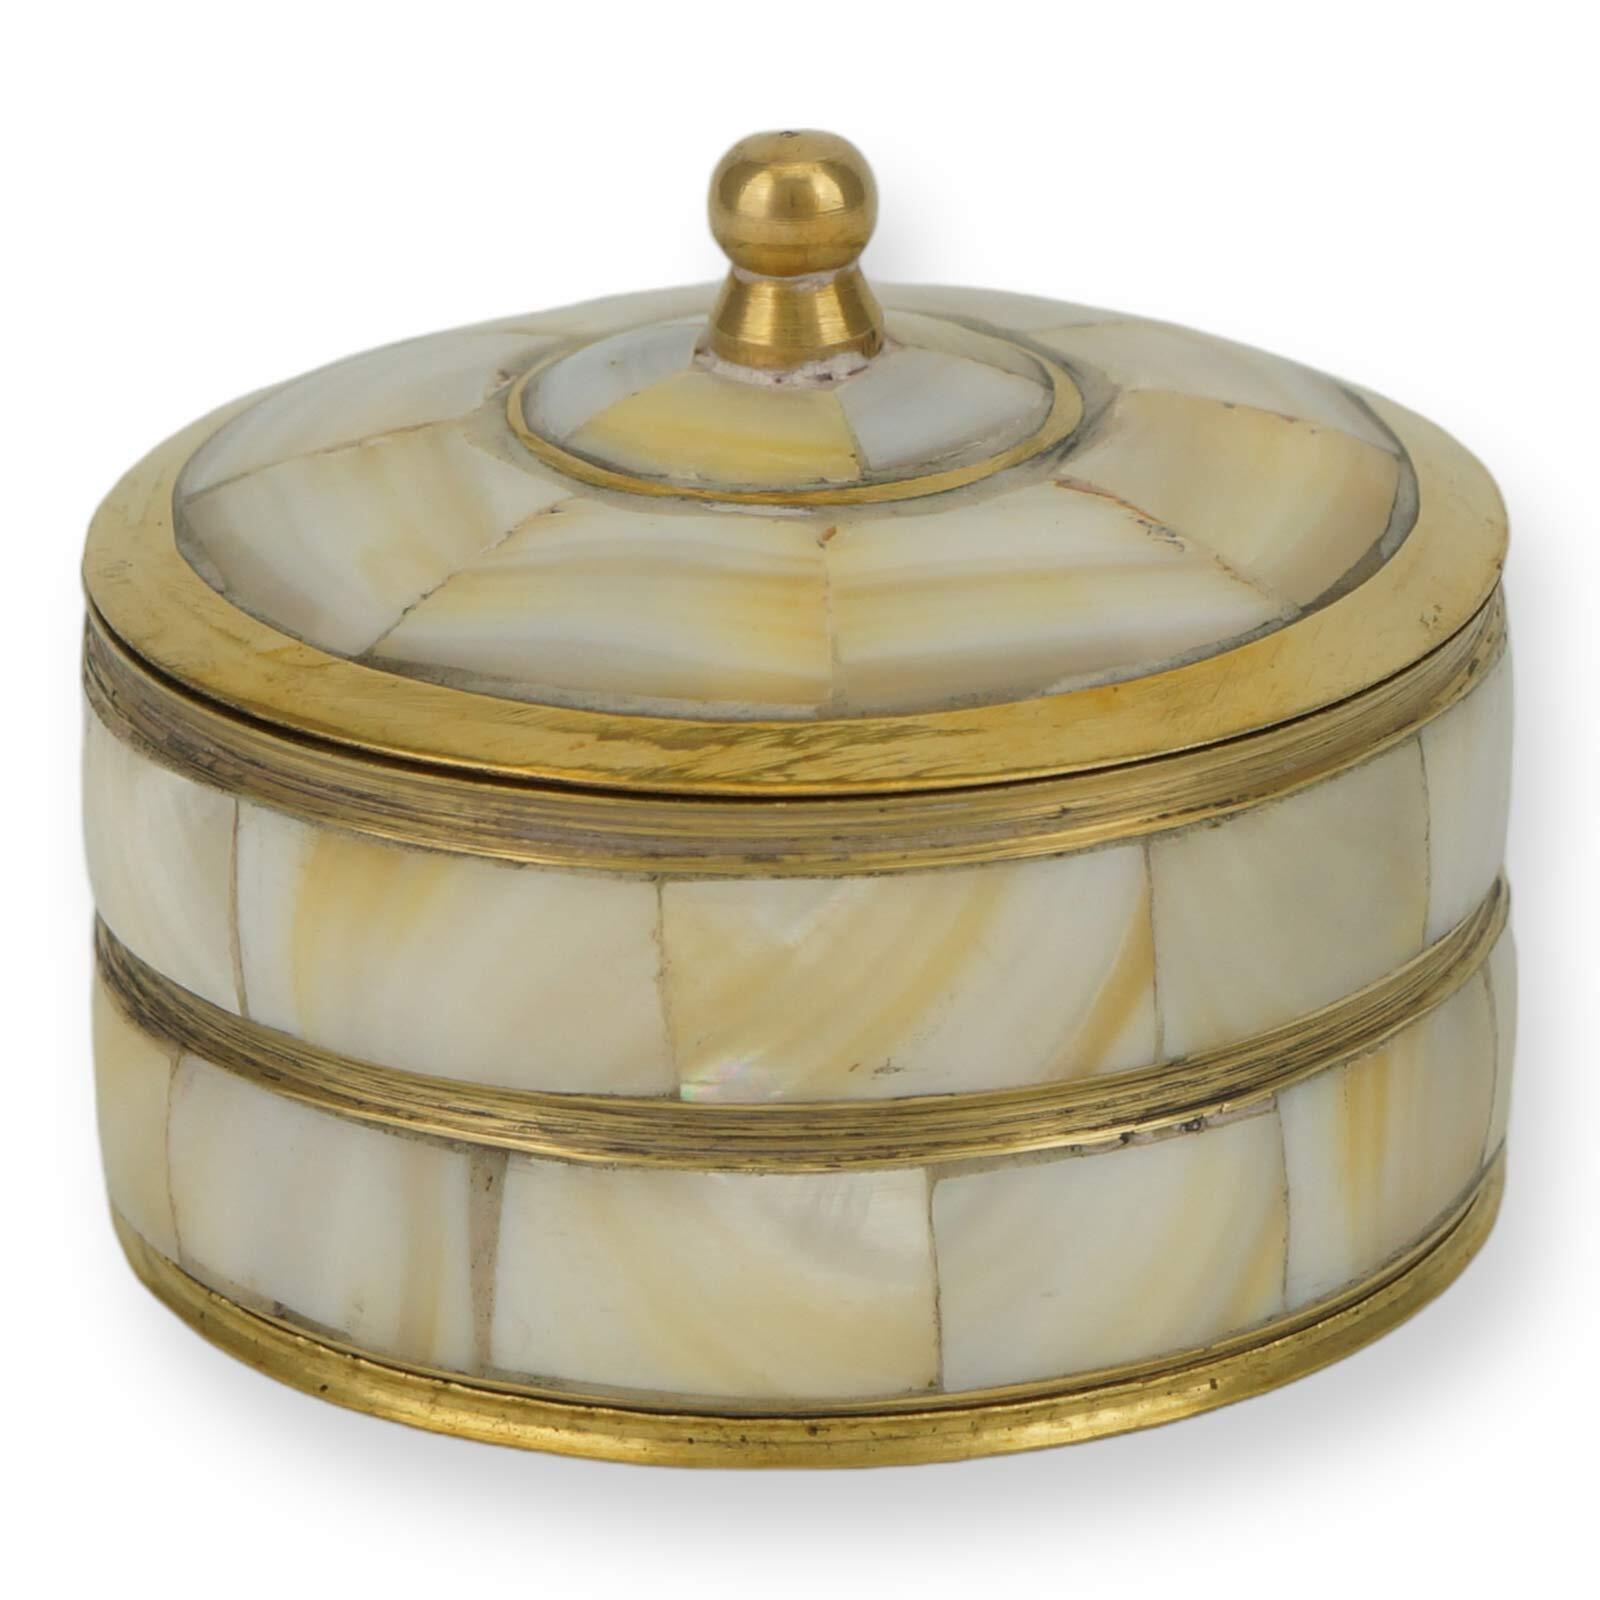 Round Brass Incense Box with Mother of Pearl Inlay - Orthodox Incense Box